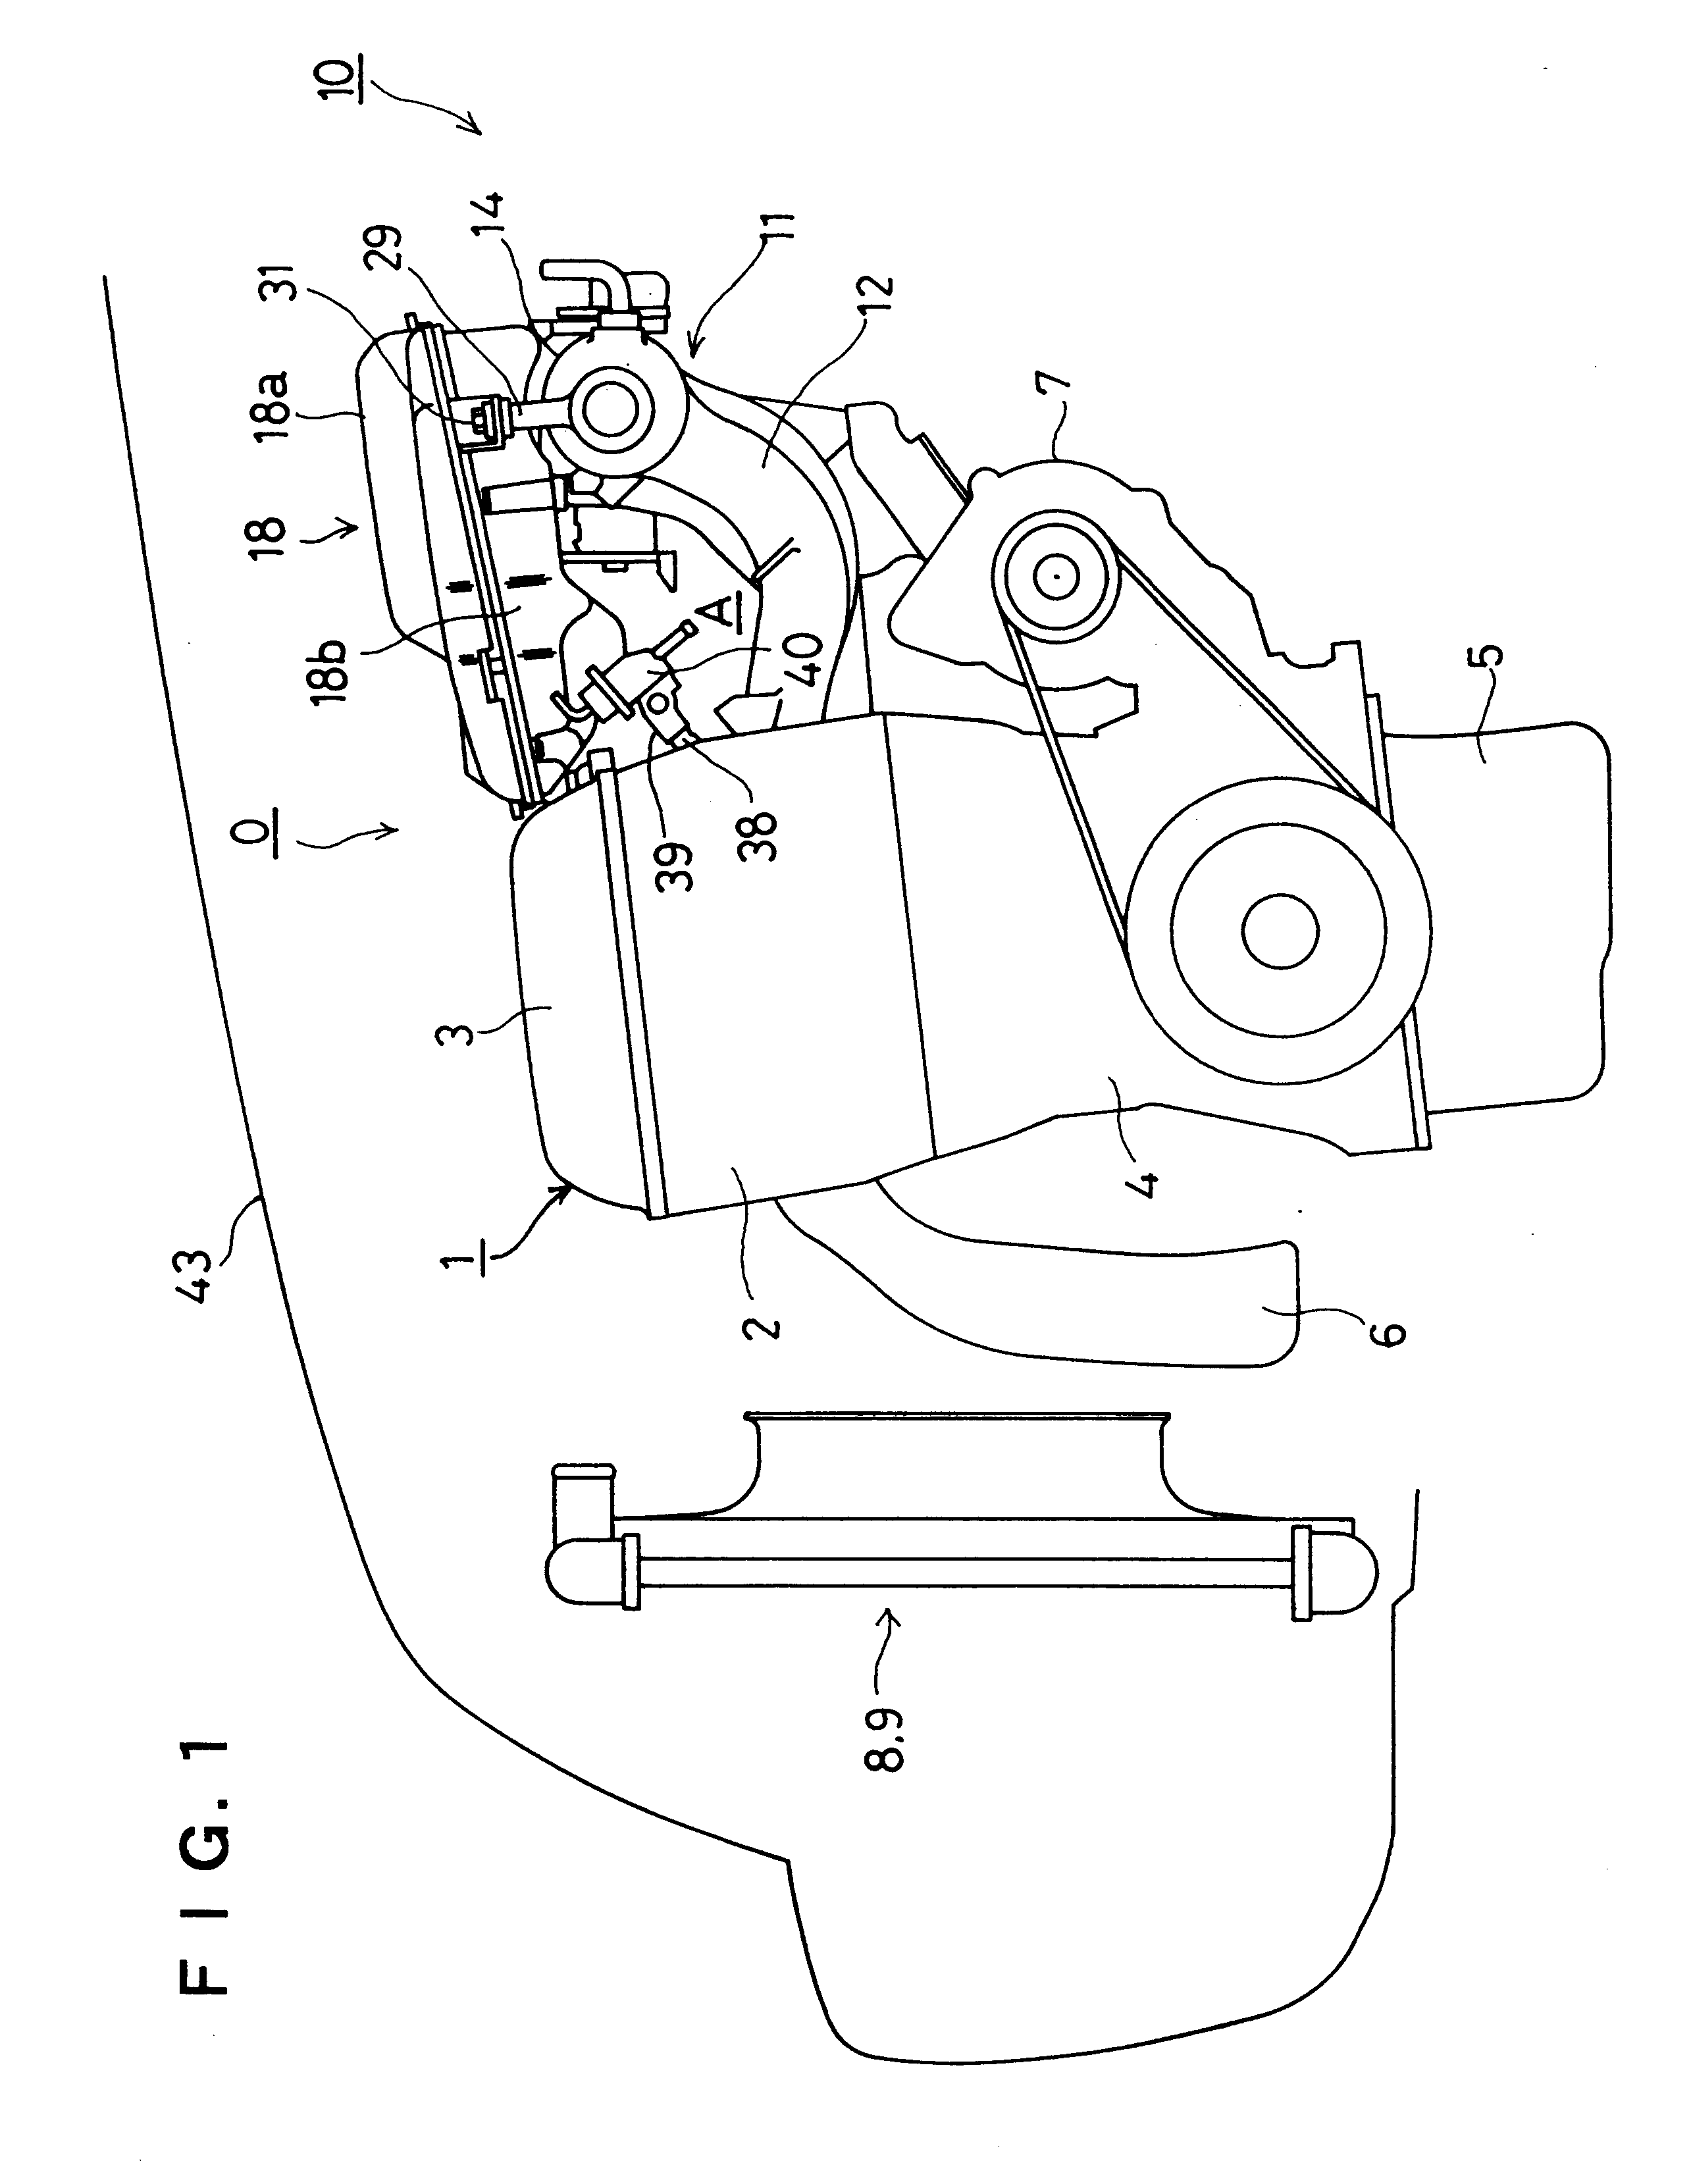 Suction apparatus of multi-cylinder internal combustion engine